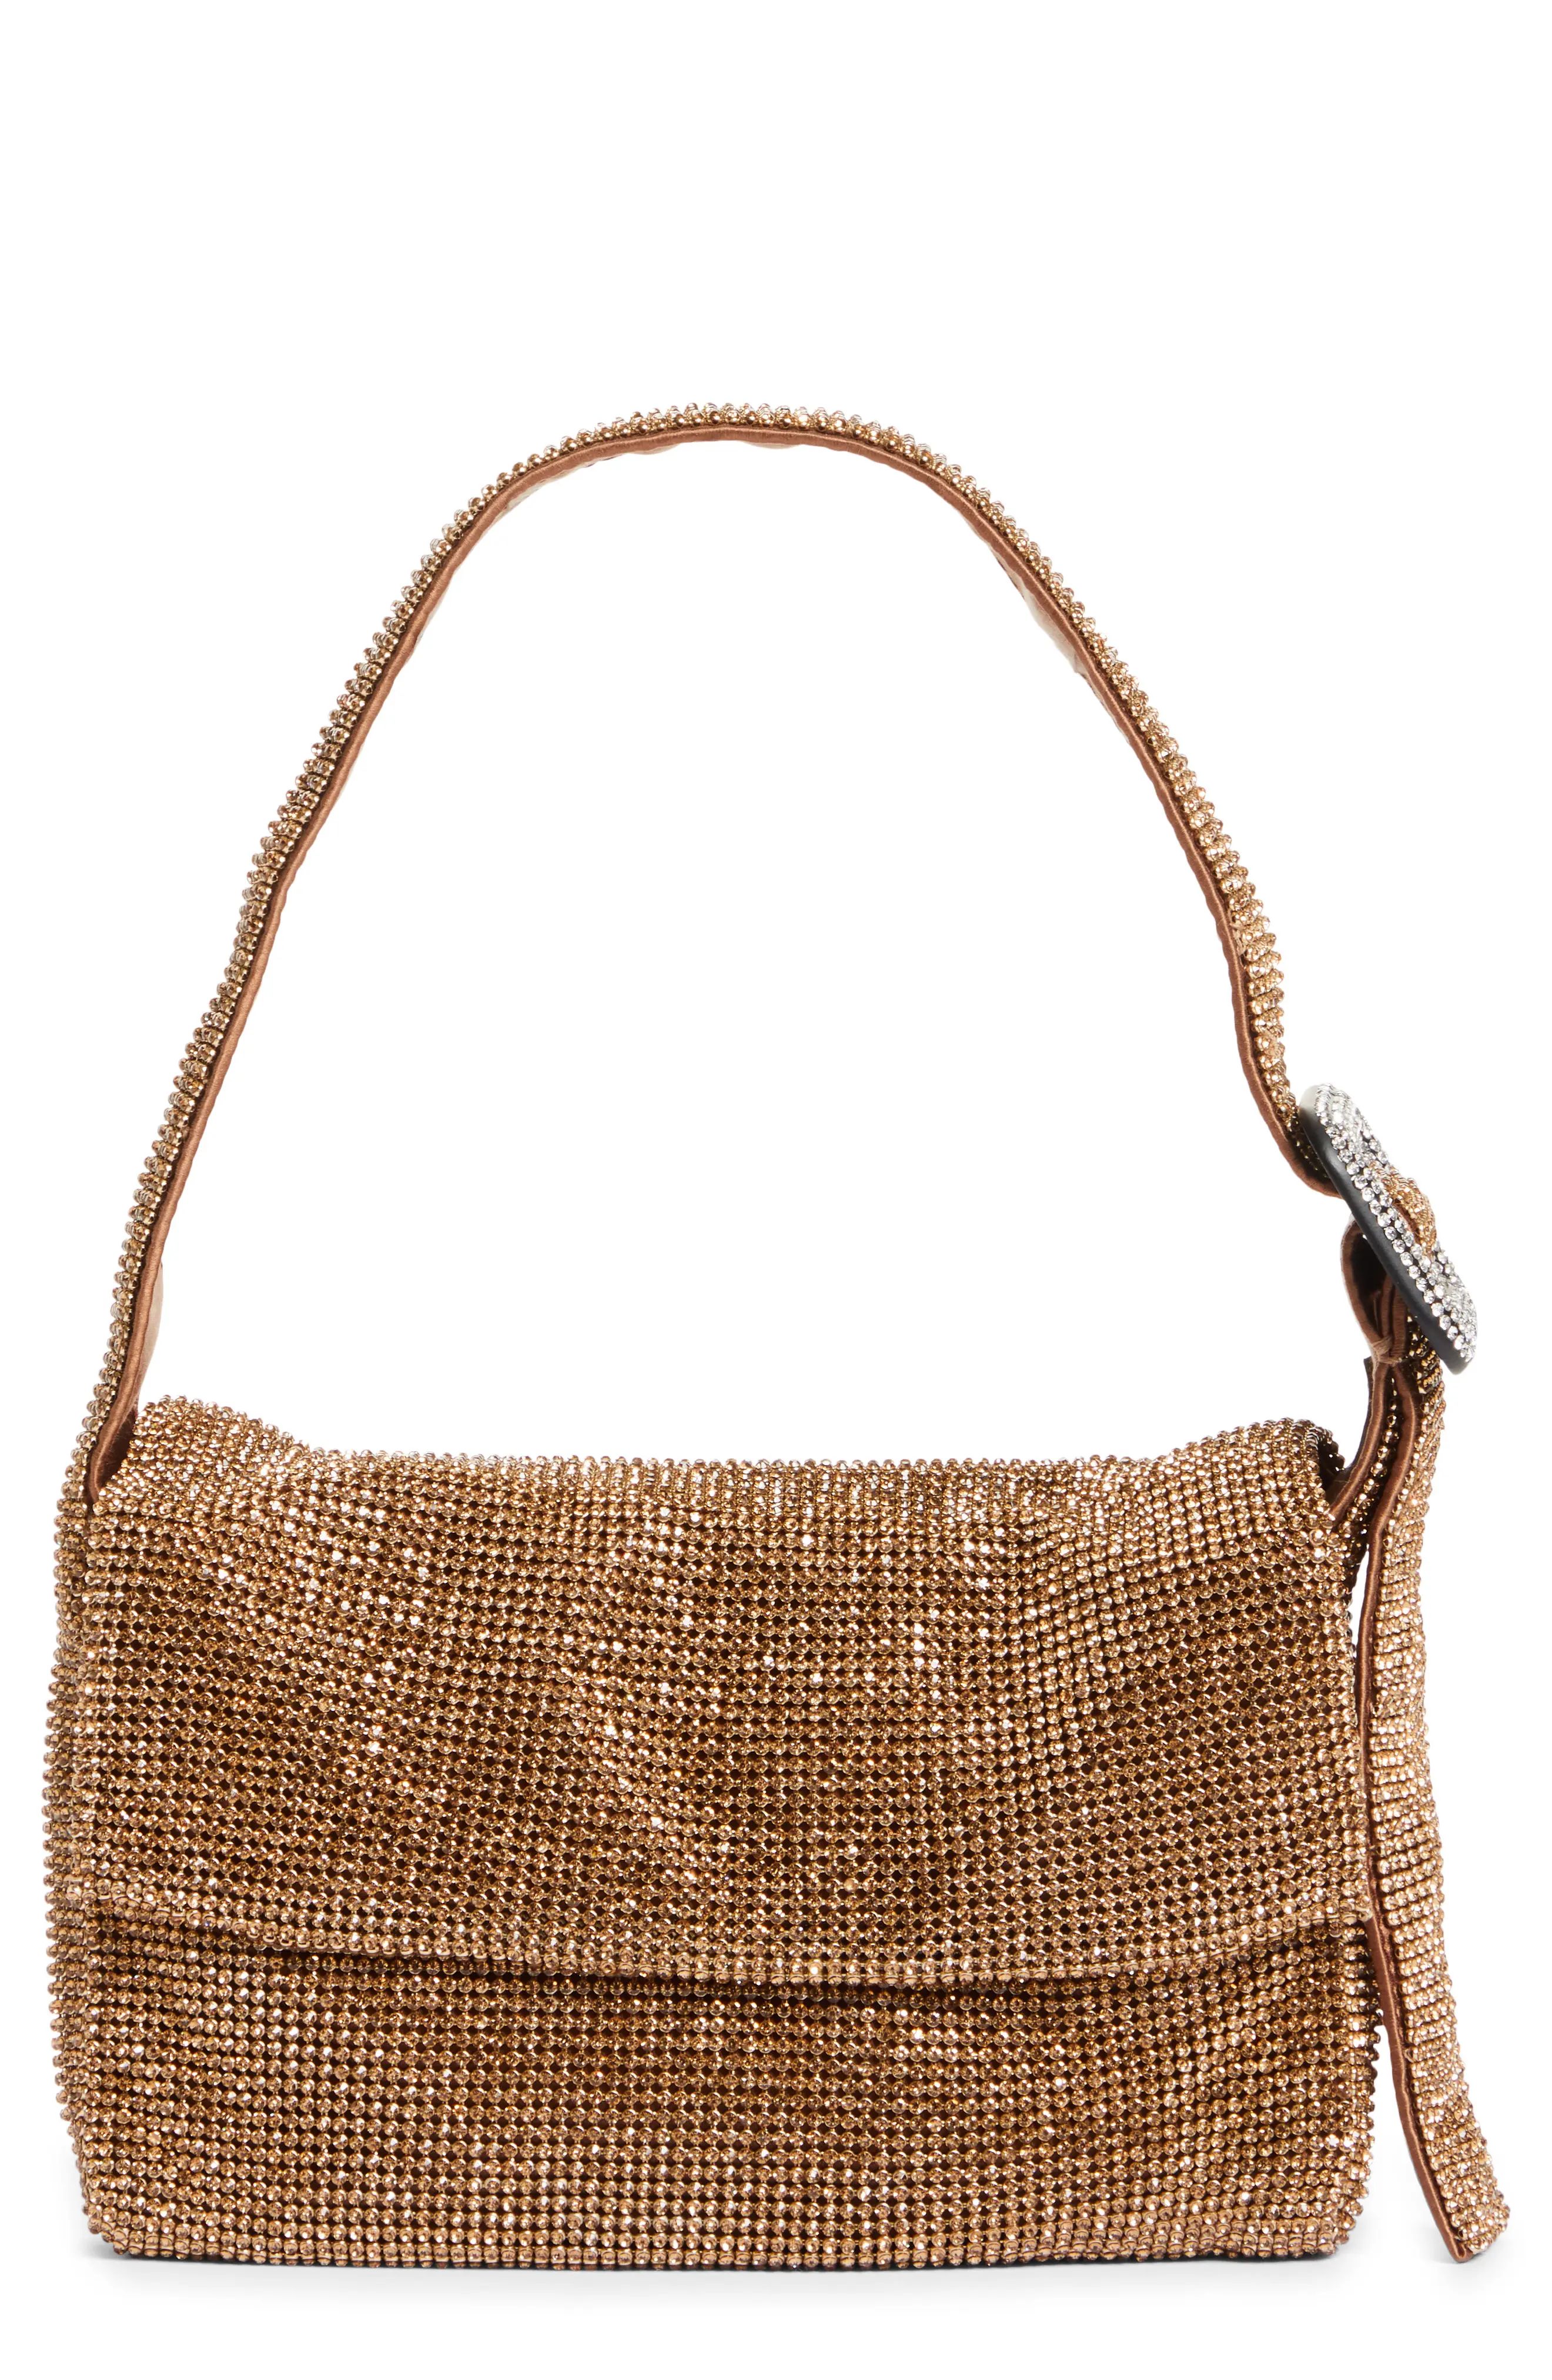 Benedetta Bruzziches Vitty Mignon Crystal Mesh Shoulder Bag in Dipping In Mousse at Nordstrom | Nordstrom